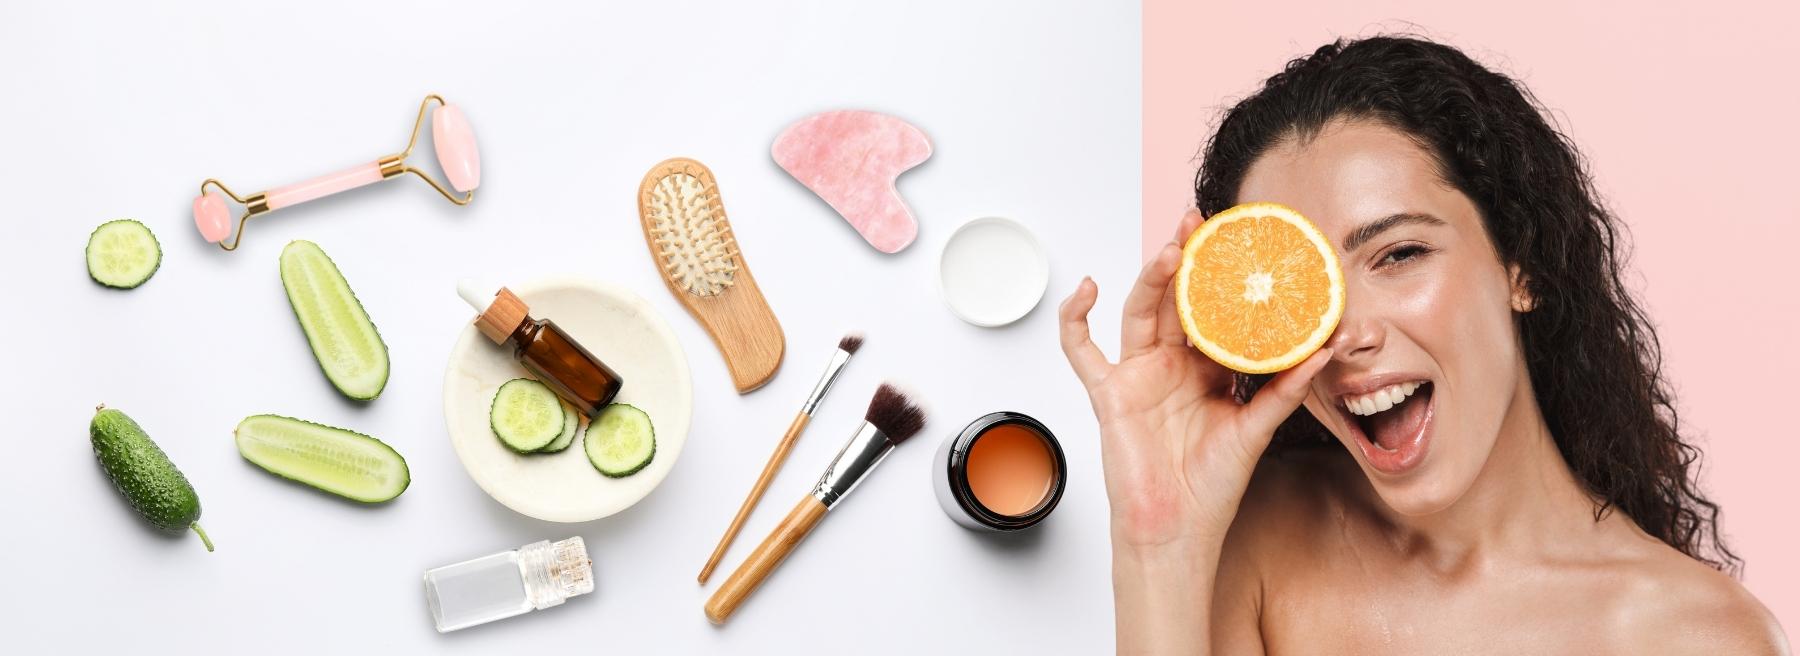 <img src="image.png" alt="woman holding an orange smiling with her skincare products">